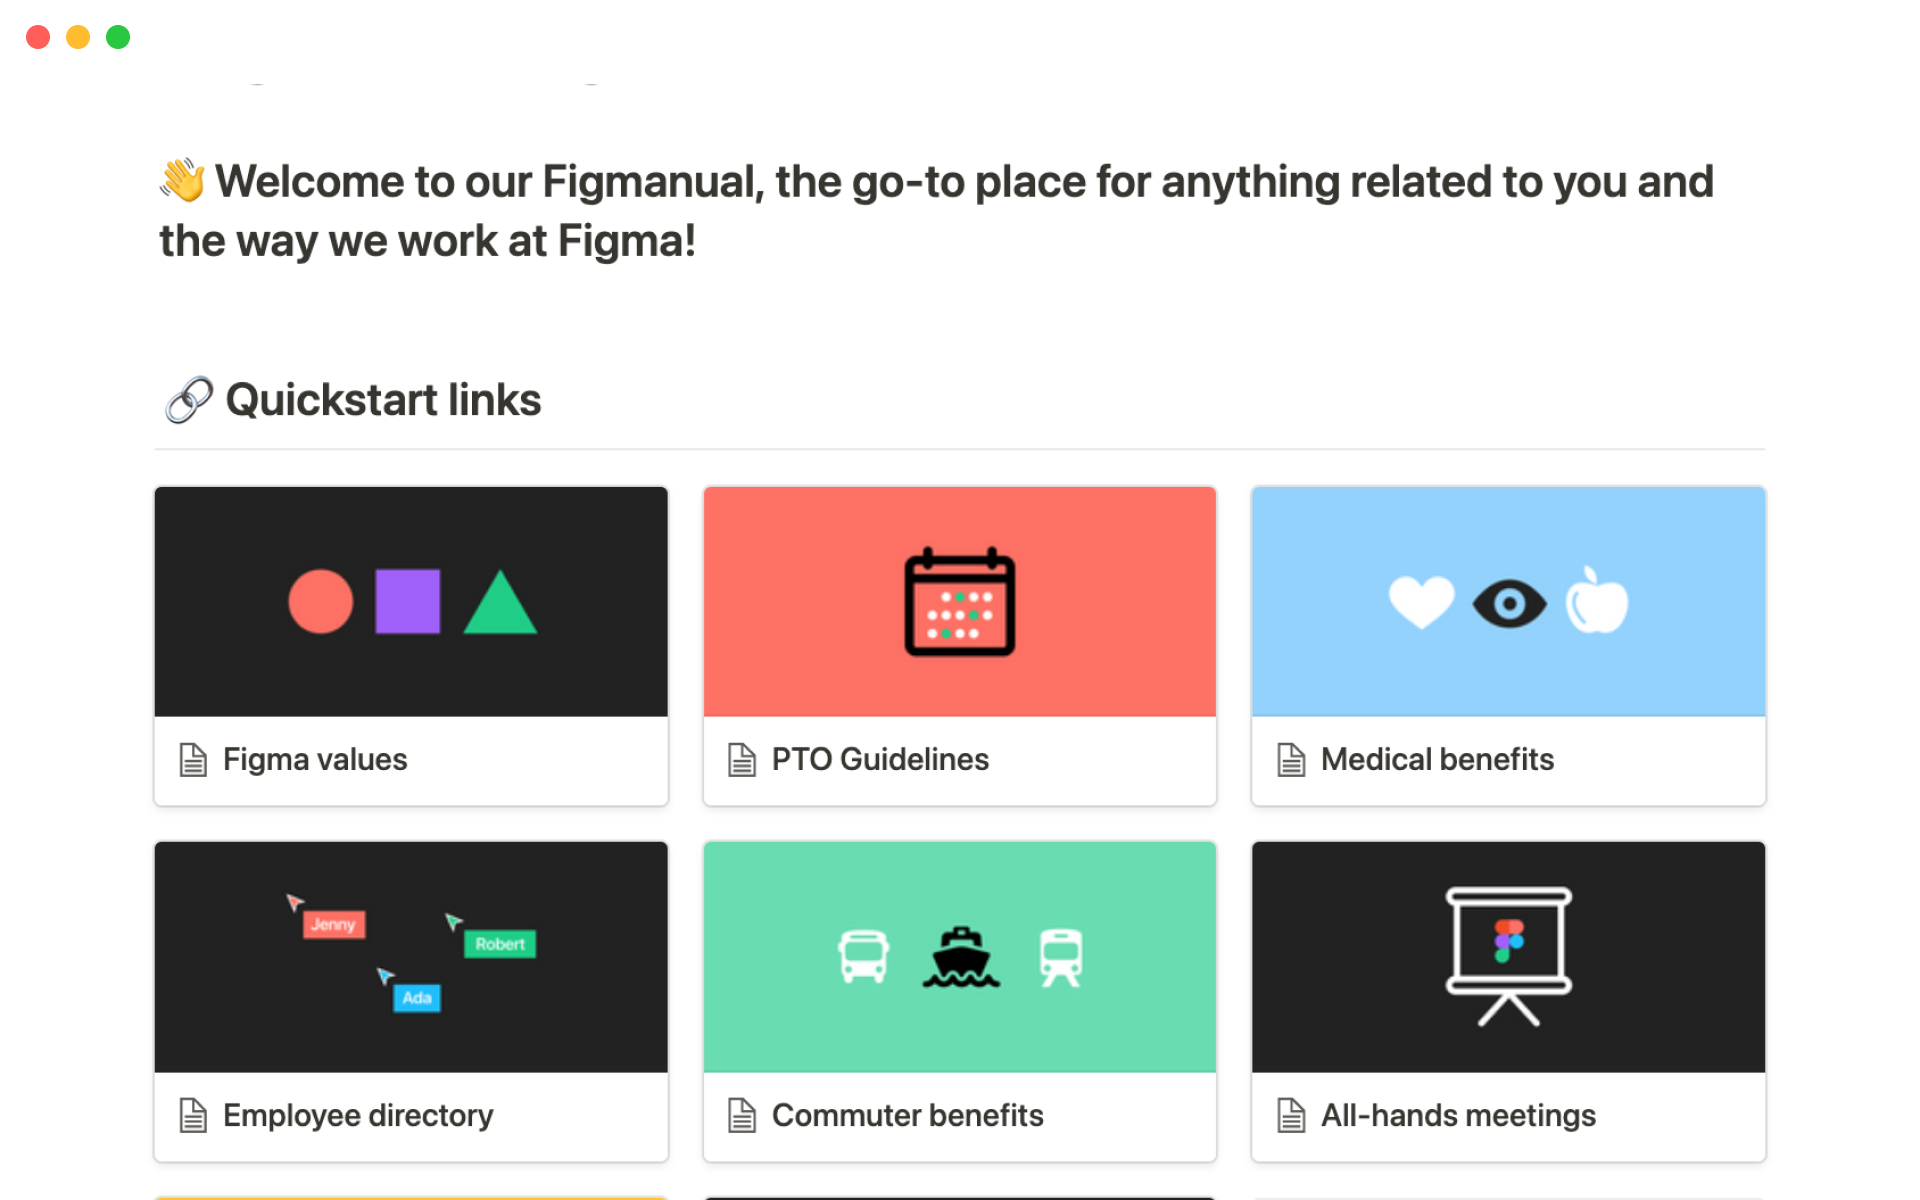 Figma's internal wiki is a one-stop resource for company information and policies.